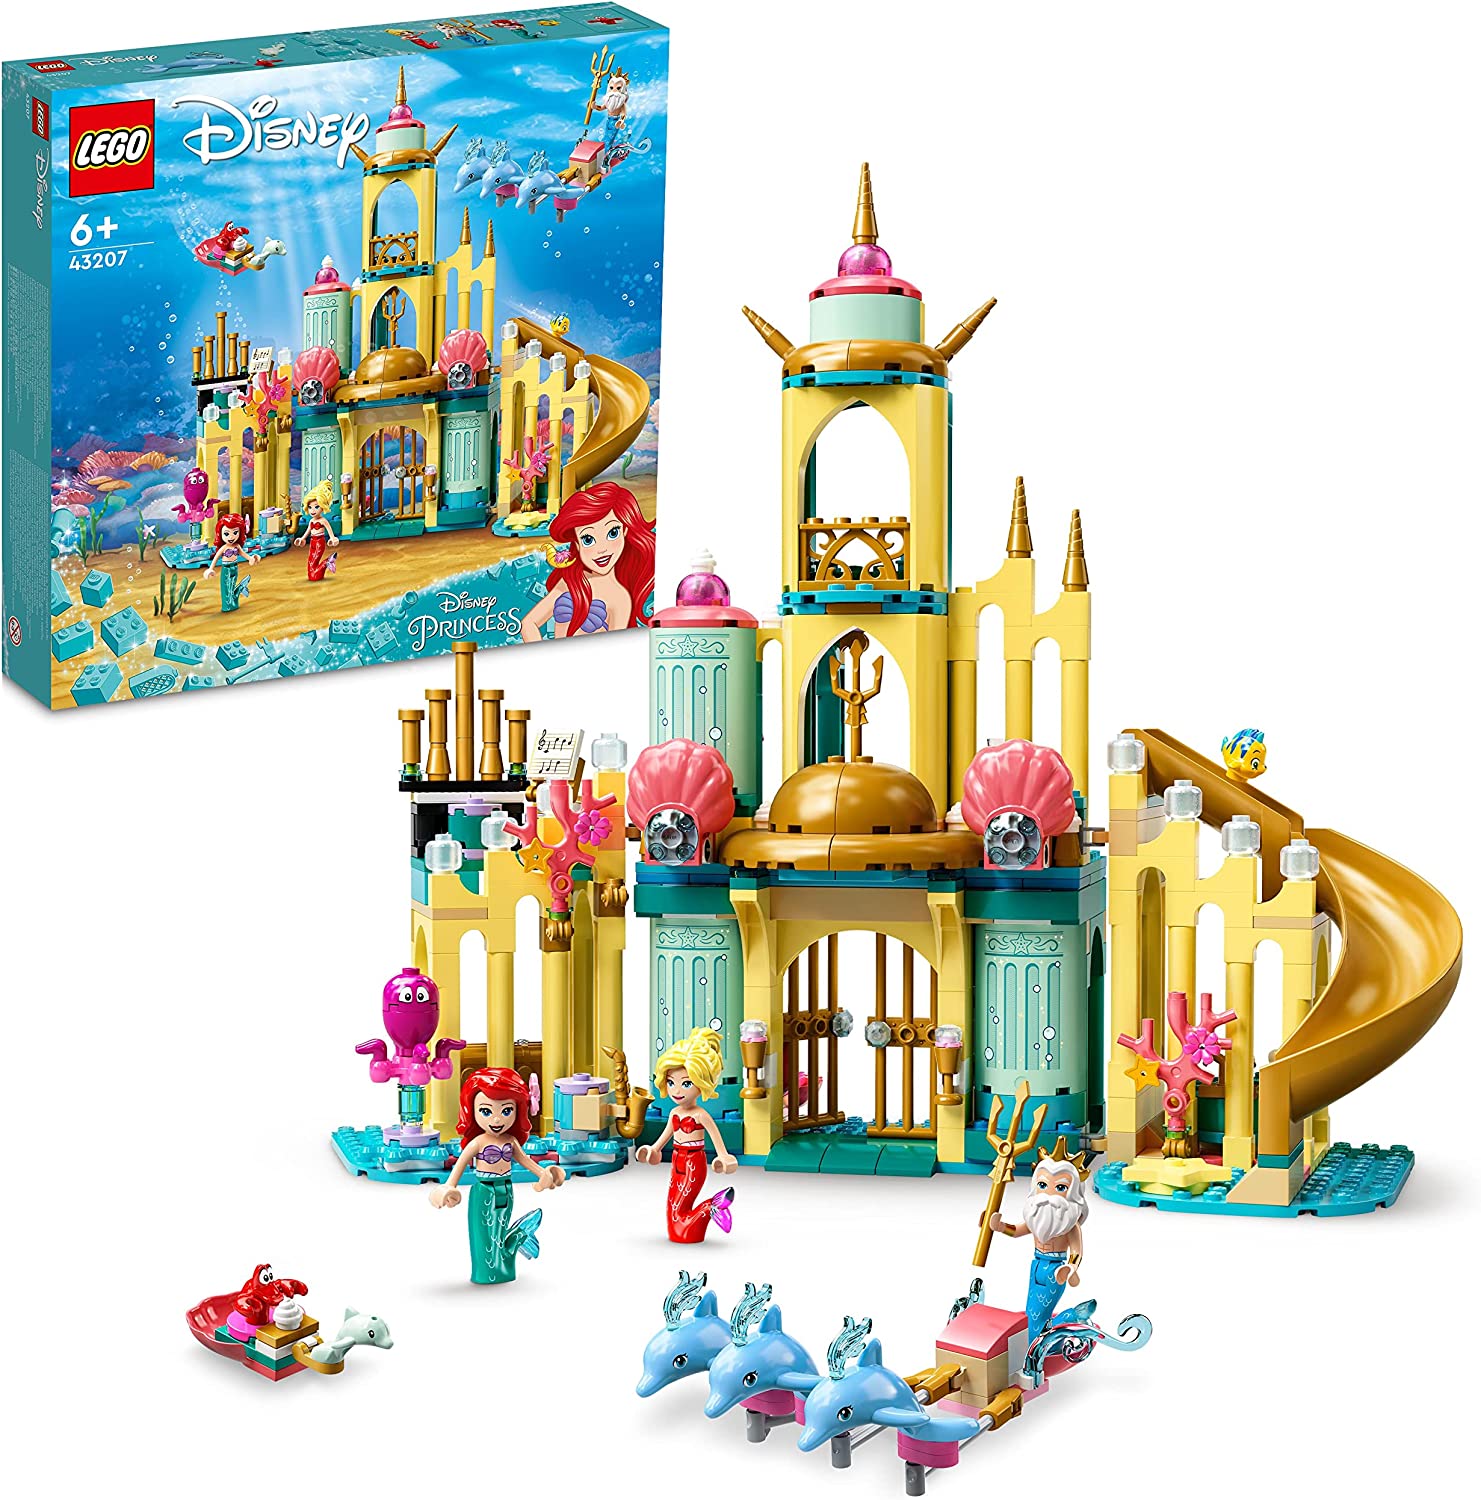 LEGO 43207 Disney Ariel Underwater Castle with Mini Doll by Ariel the Little Mermaid and 4 Dolphin Figures, Castle Toy